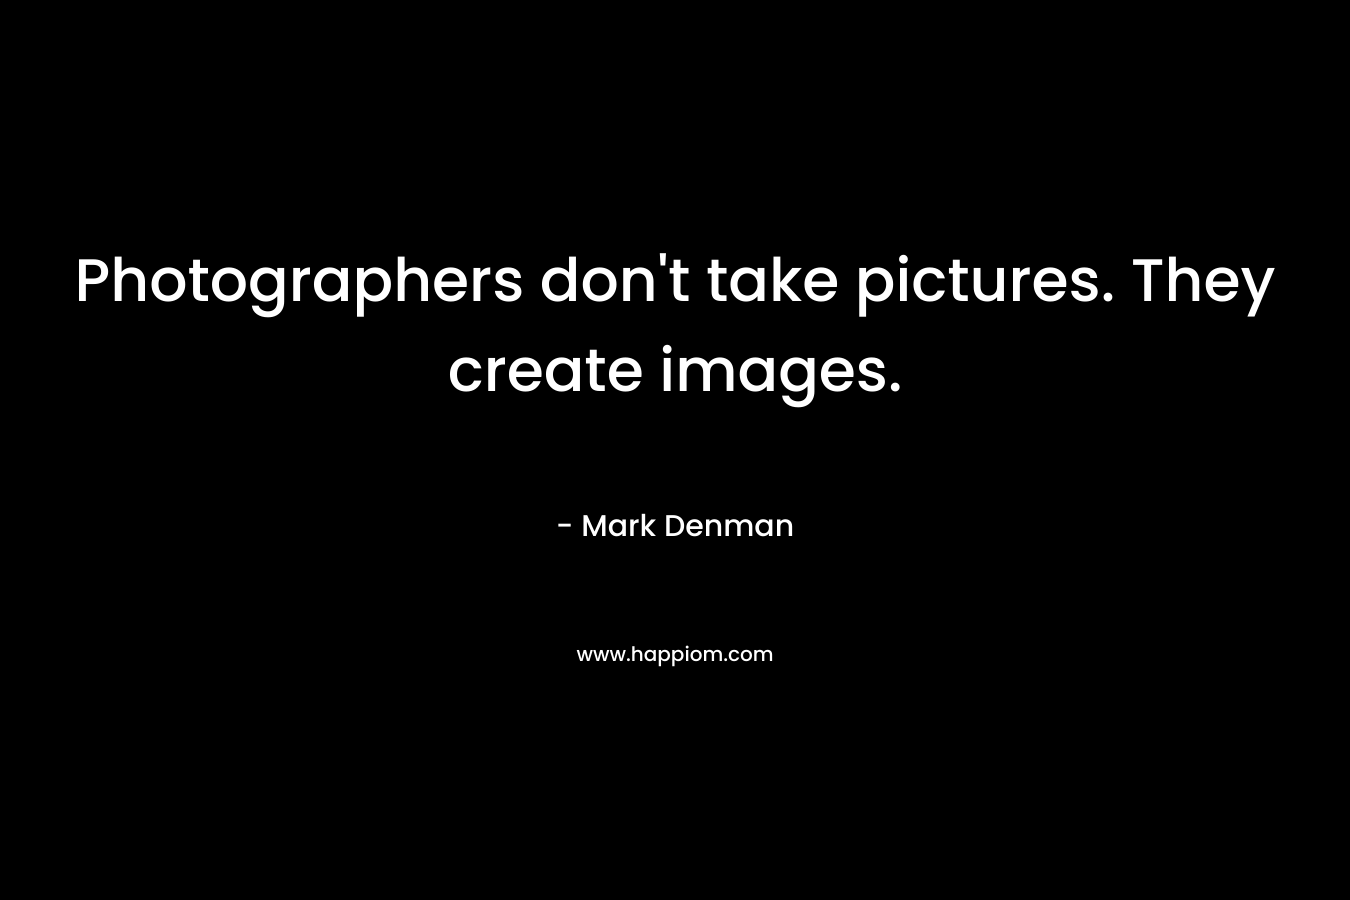 Photographers don't take pictures. They create images.